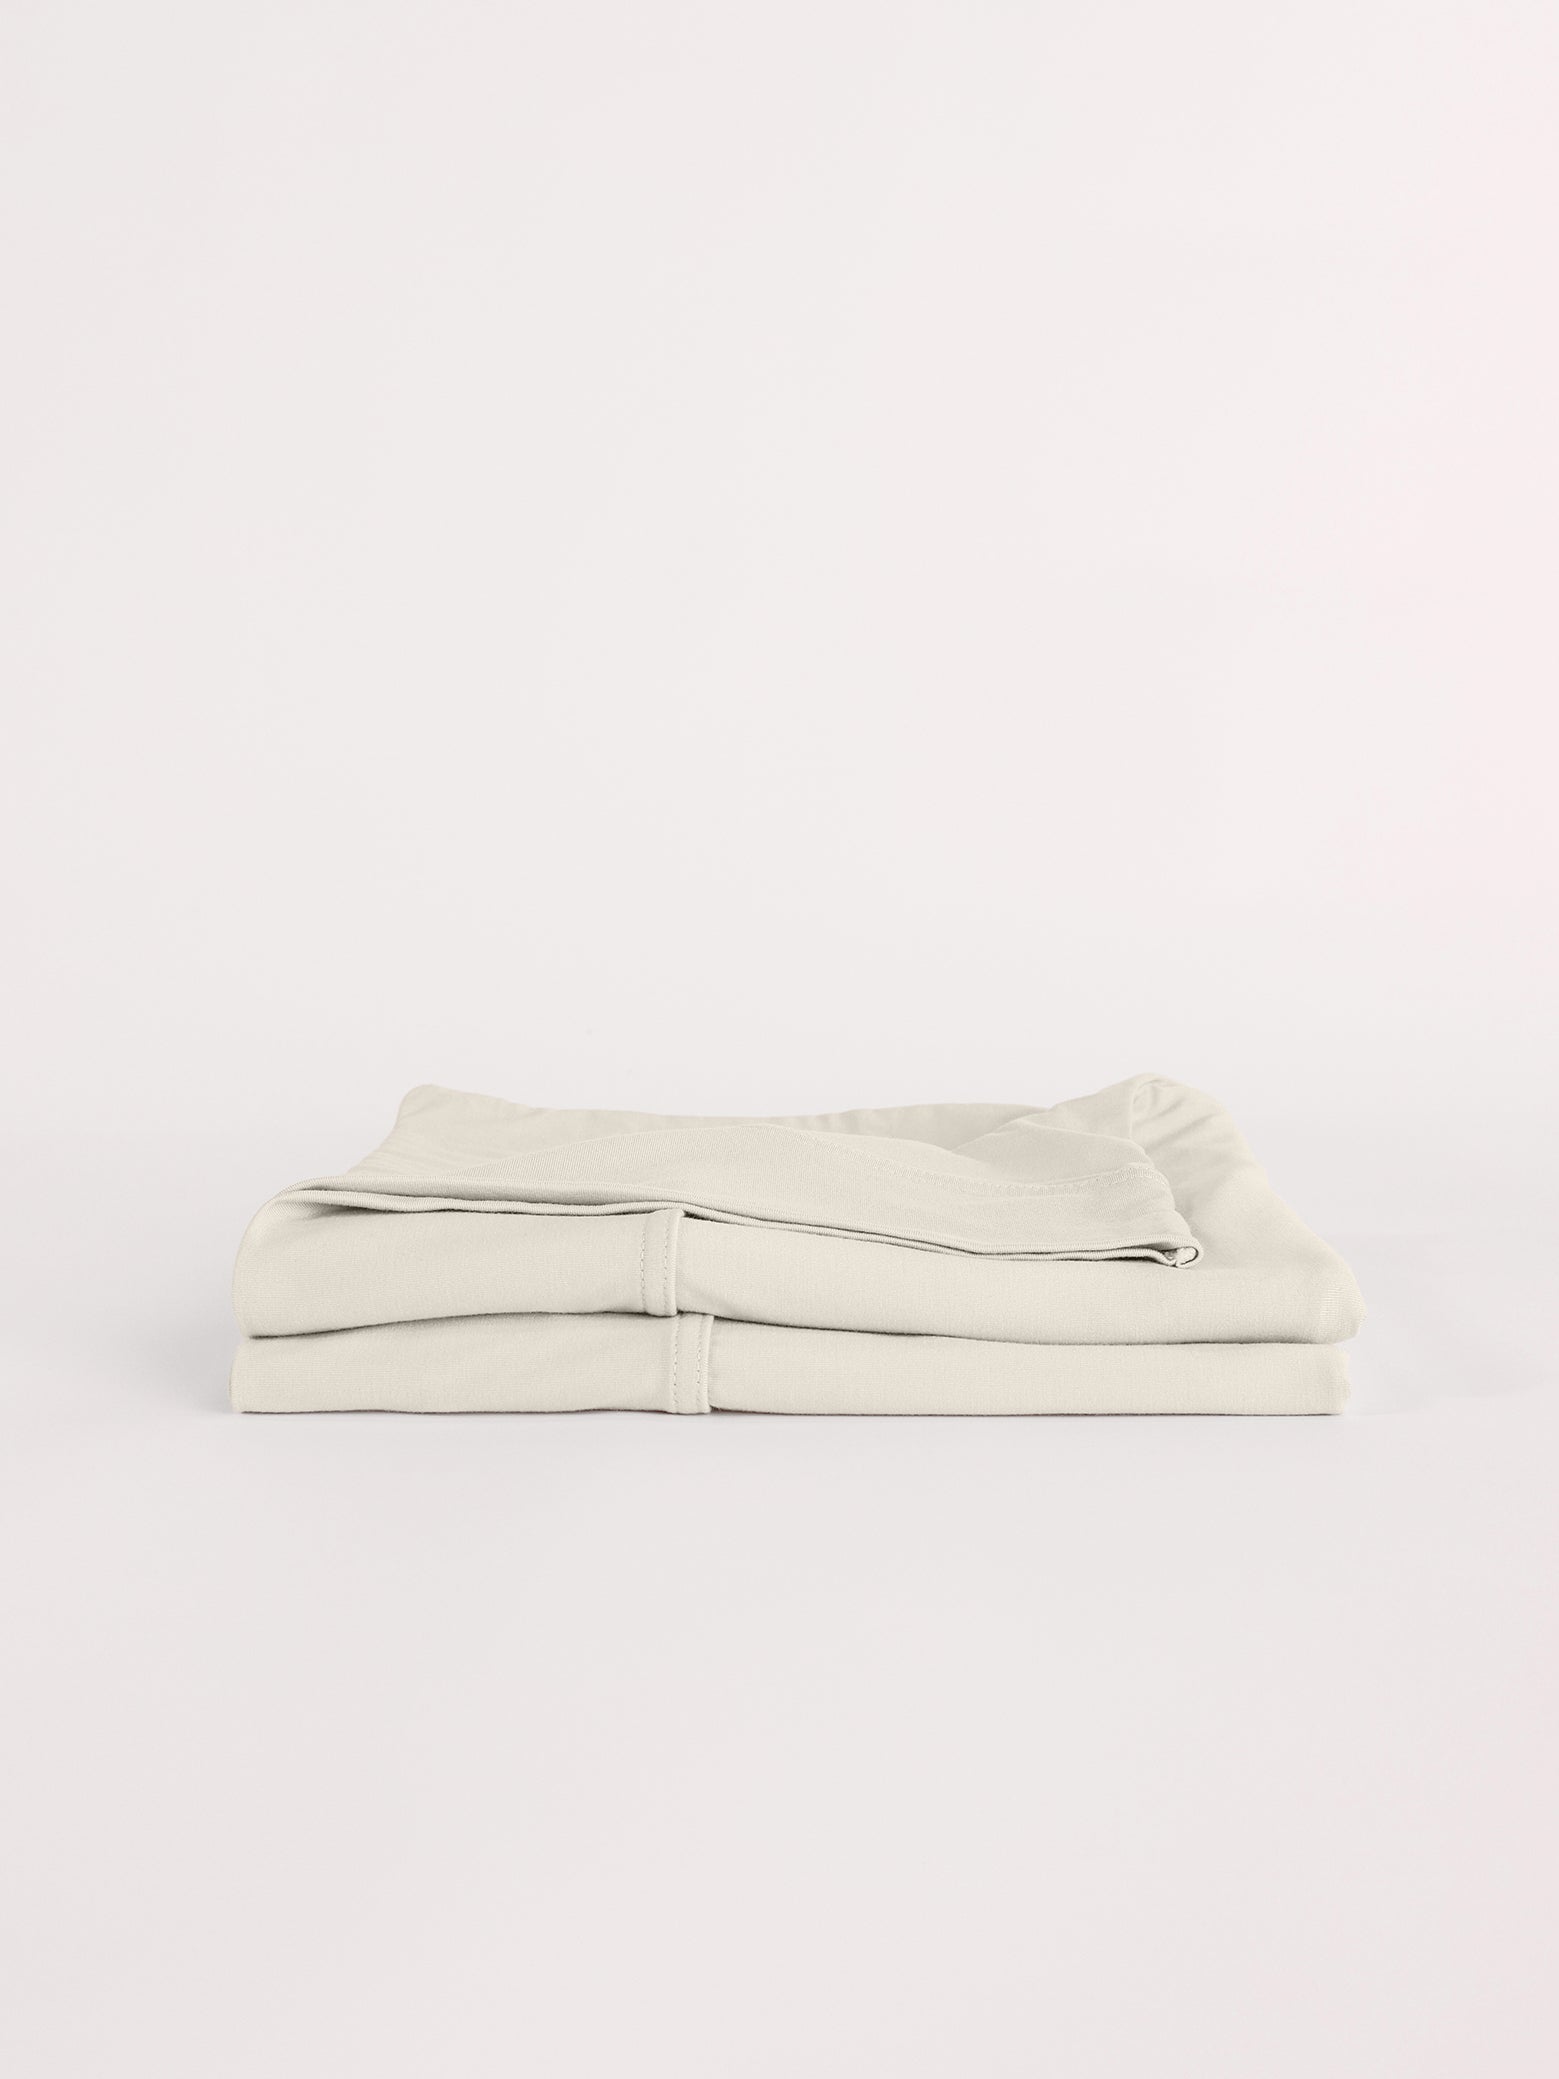 Birch pillowcases folded with white background 